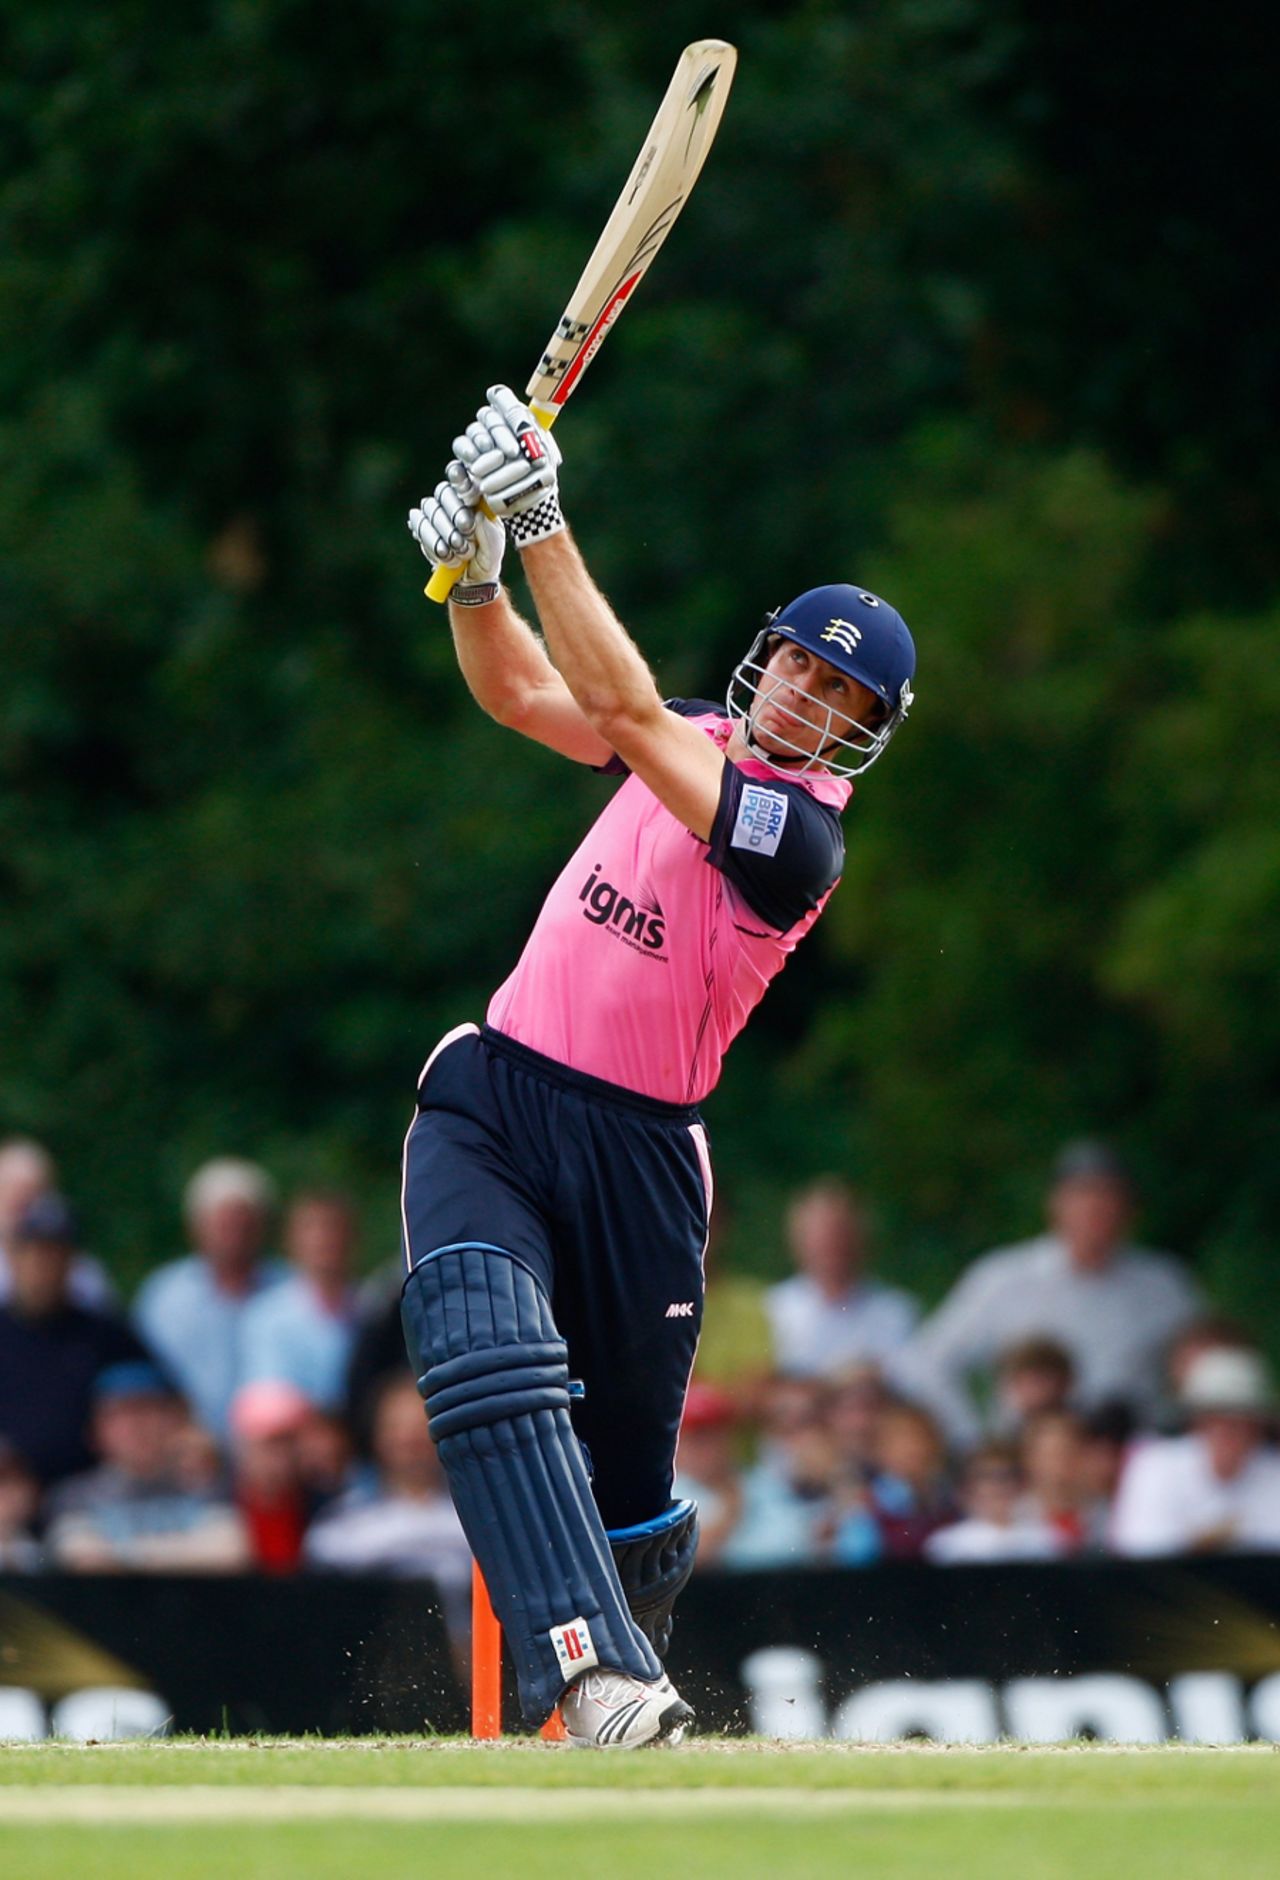 Ryan McLaren's late hitting helped Middlesex tie with Somerset, Middlesex v Somerset, Friends Life t20, Southgate, July 10 2011